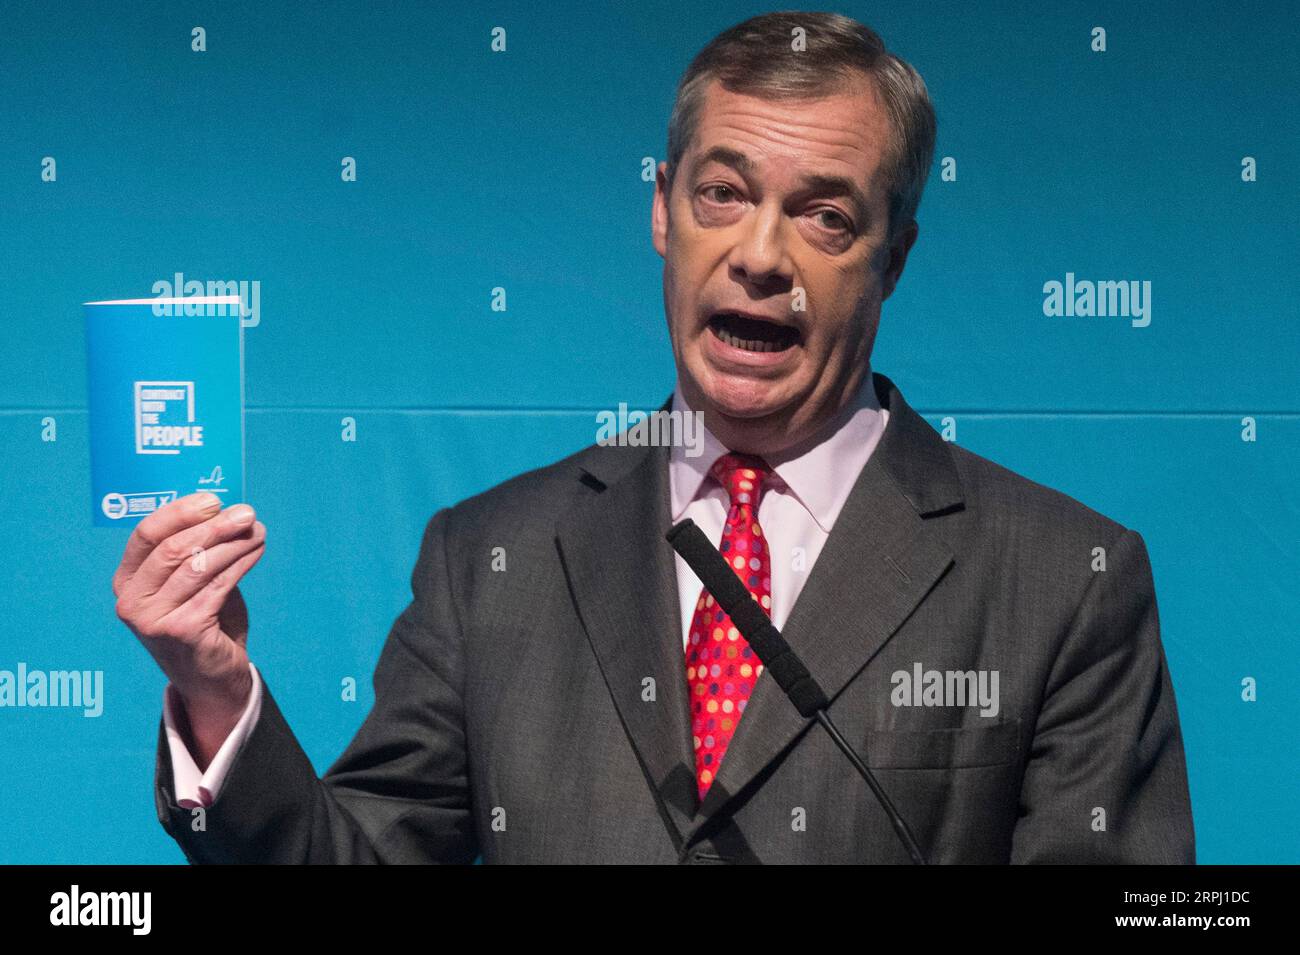 191122 -- LONDON, Nov. 22, 2019 -- Brexit Party leader Nigel Farage speaks at an event to launch Brexit Party general election policies in London, Britain on Nov. 22, 2019. Photo by Ray Tang/Xinhua BRITAIN-LONDON-BREXIT PARTY-GENERAL ELECTION POLICIES-LAUNCH HanxYan PUBLICATIONxNOTxINxCHN Stock Photo